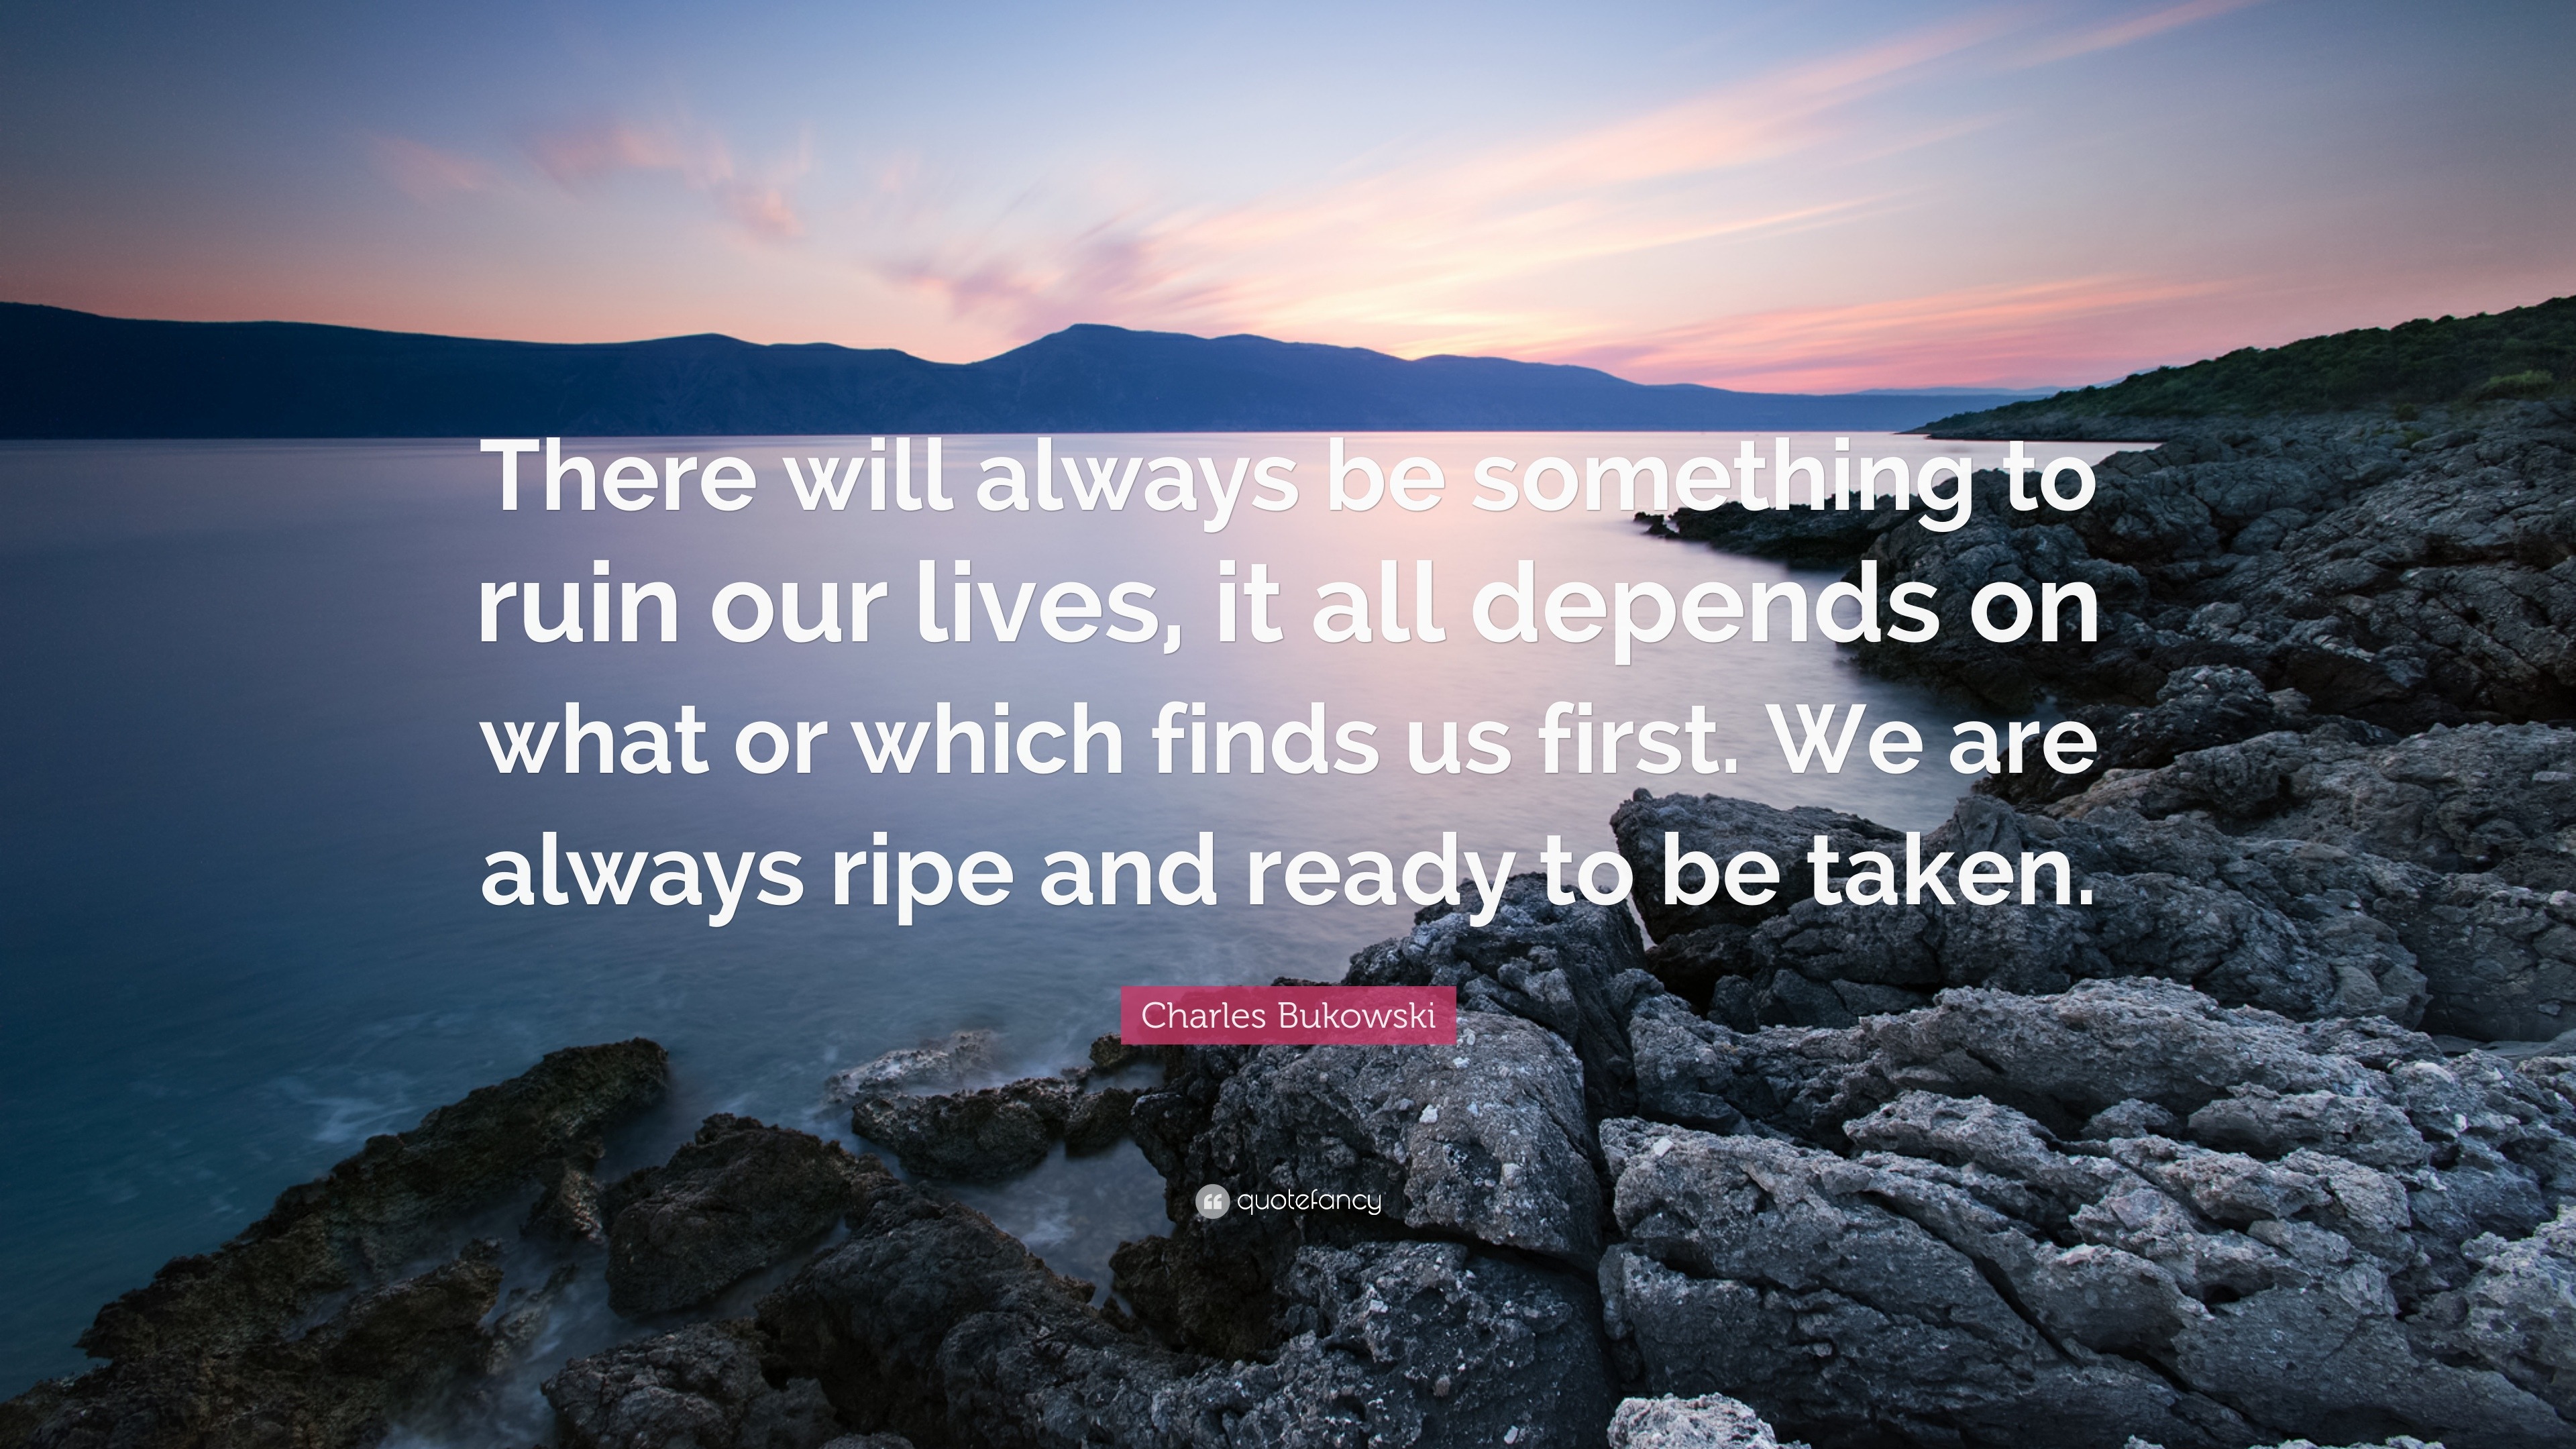 Charles Bukowski Quote: “There will always be something to ruin our ...